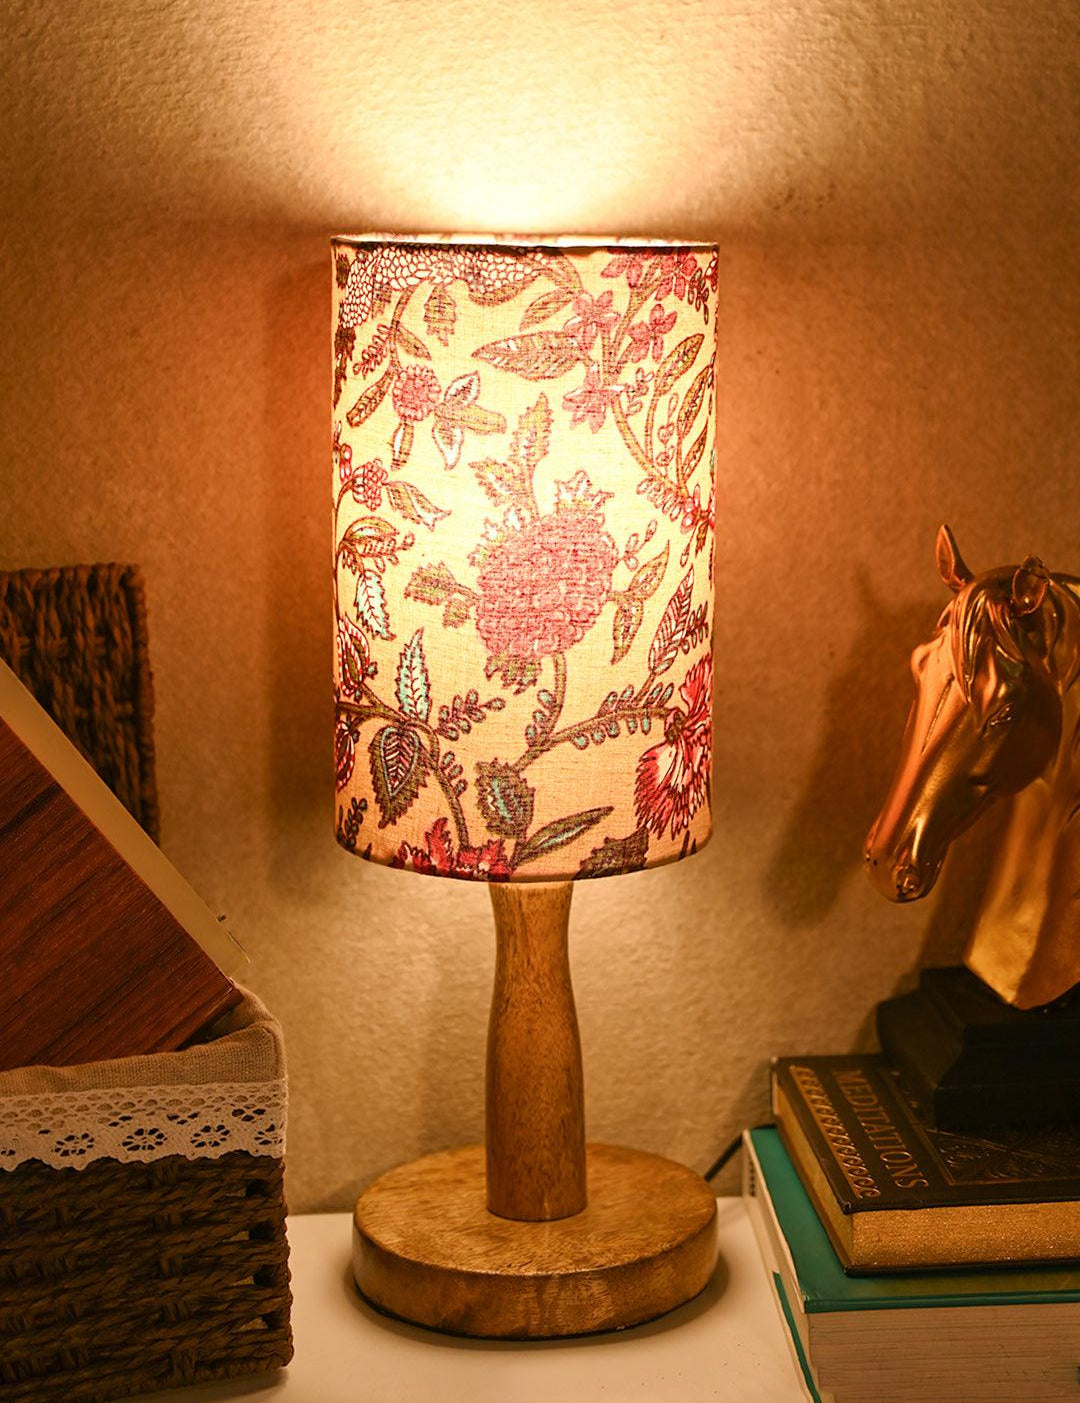 Wooden Table Lamp With Multi Floral Print Shade - MARKET99